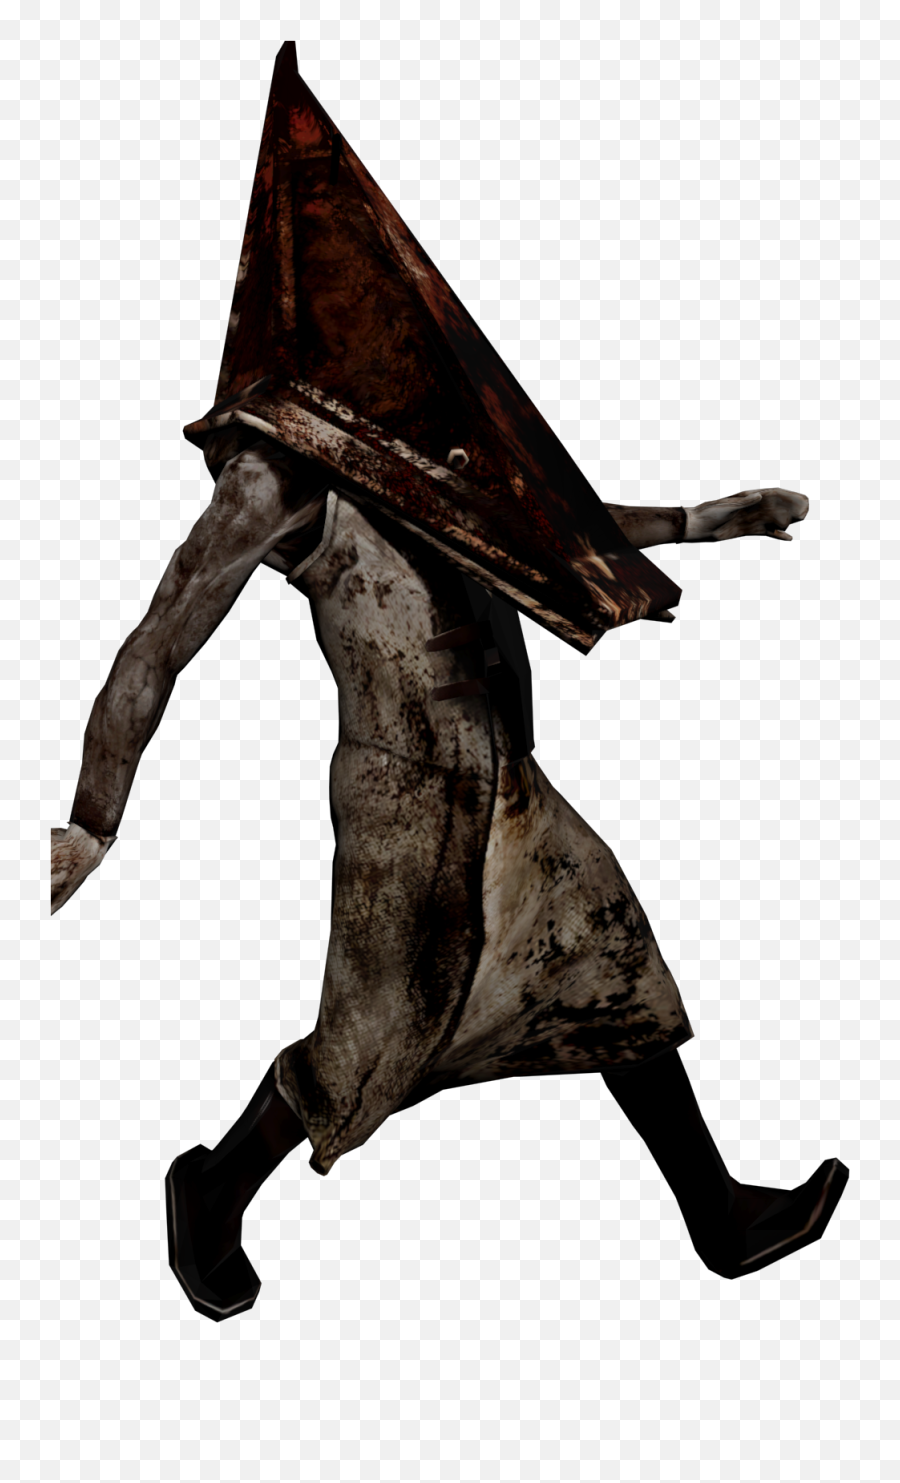 Silent Hill Pyramid Head Png Image - Silent Hill Pyramid Head Gif Transparent,Pyramid Head Png